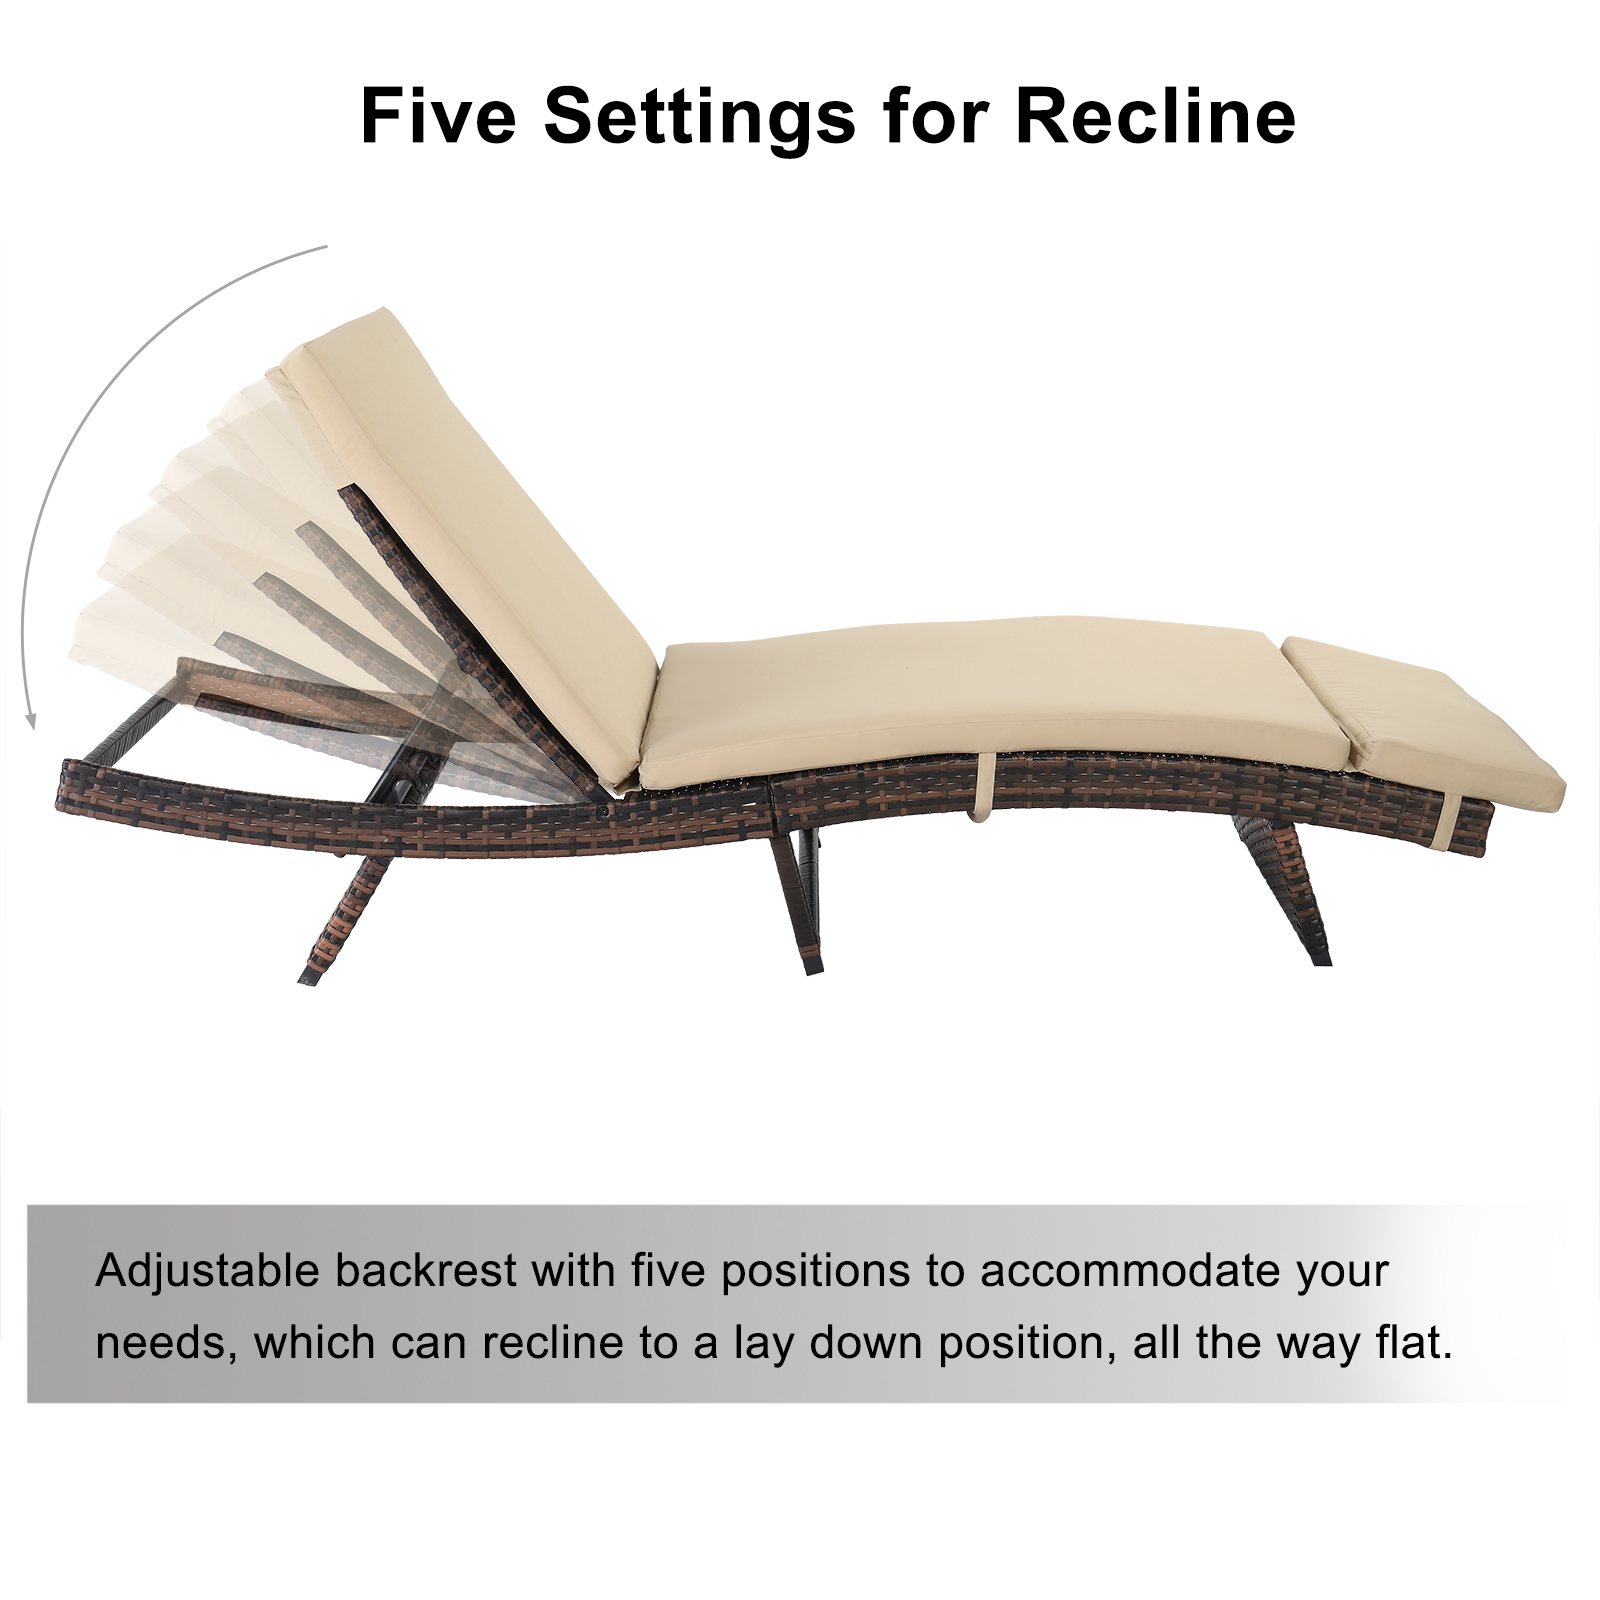 uhomepro Patio Rattan Lounge Chair Chaise Recliner, Outdoor Patio Furniture Set for Pool, Reclining Rattan Lounge Chair Chaise Couch Cushioned with Adjustable Back, Beige - image 5 of 10